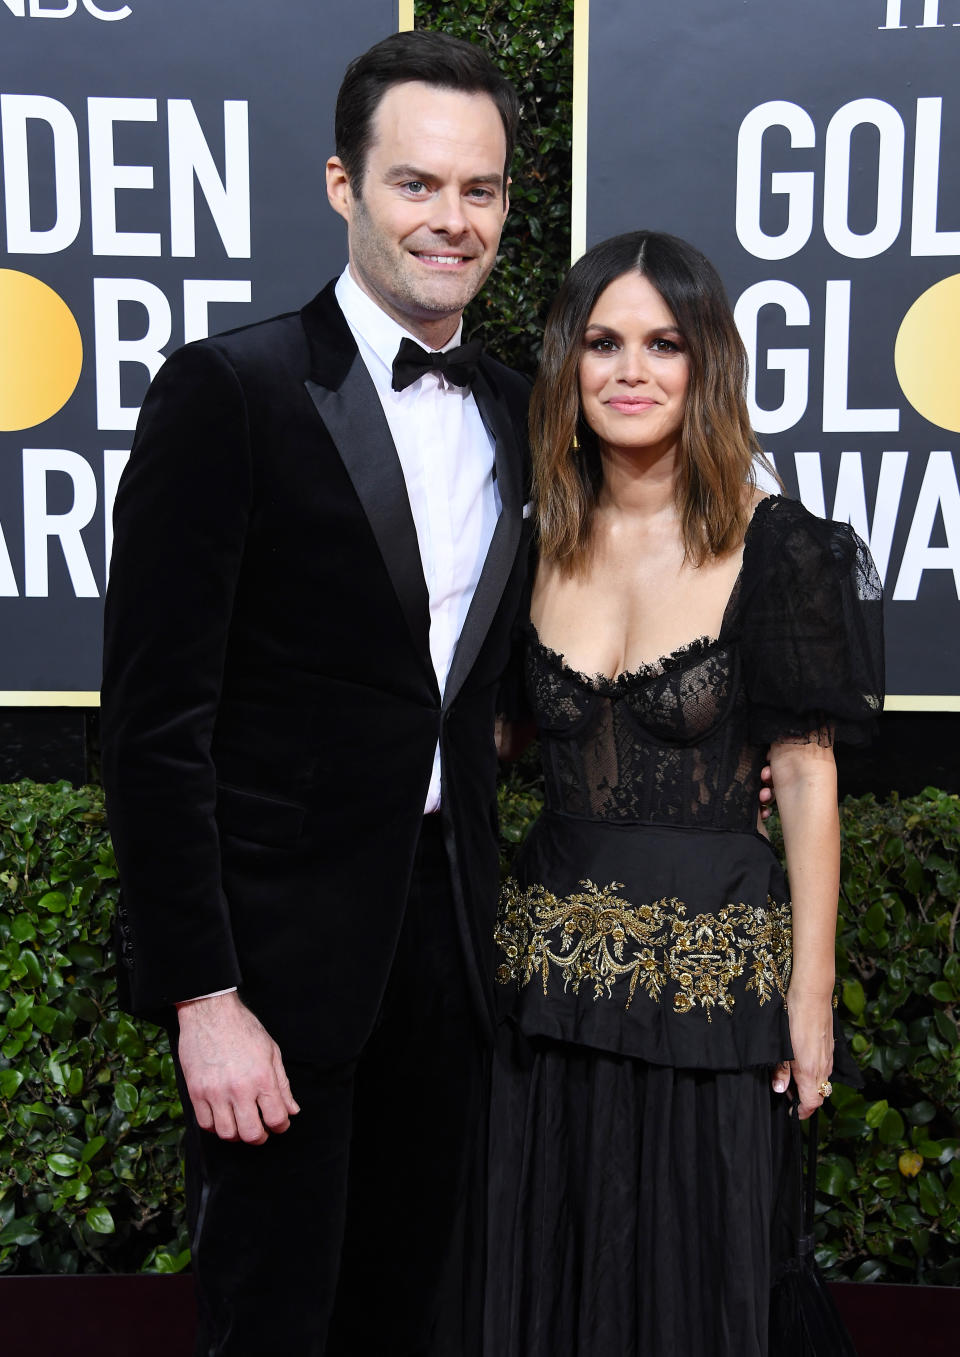 Man in black tuxedo and woman in ornate black dress with sheer details pose together at the Golden Globes